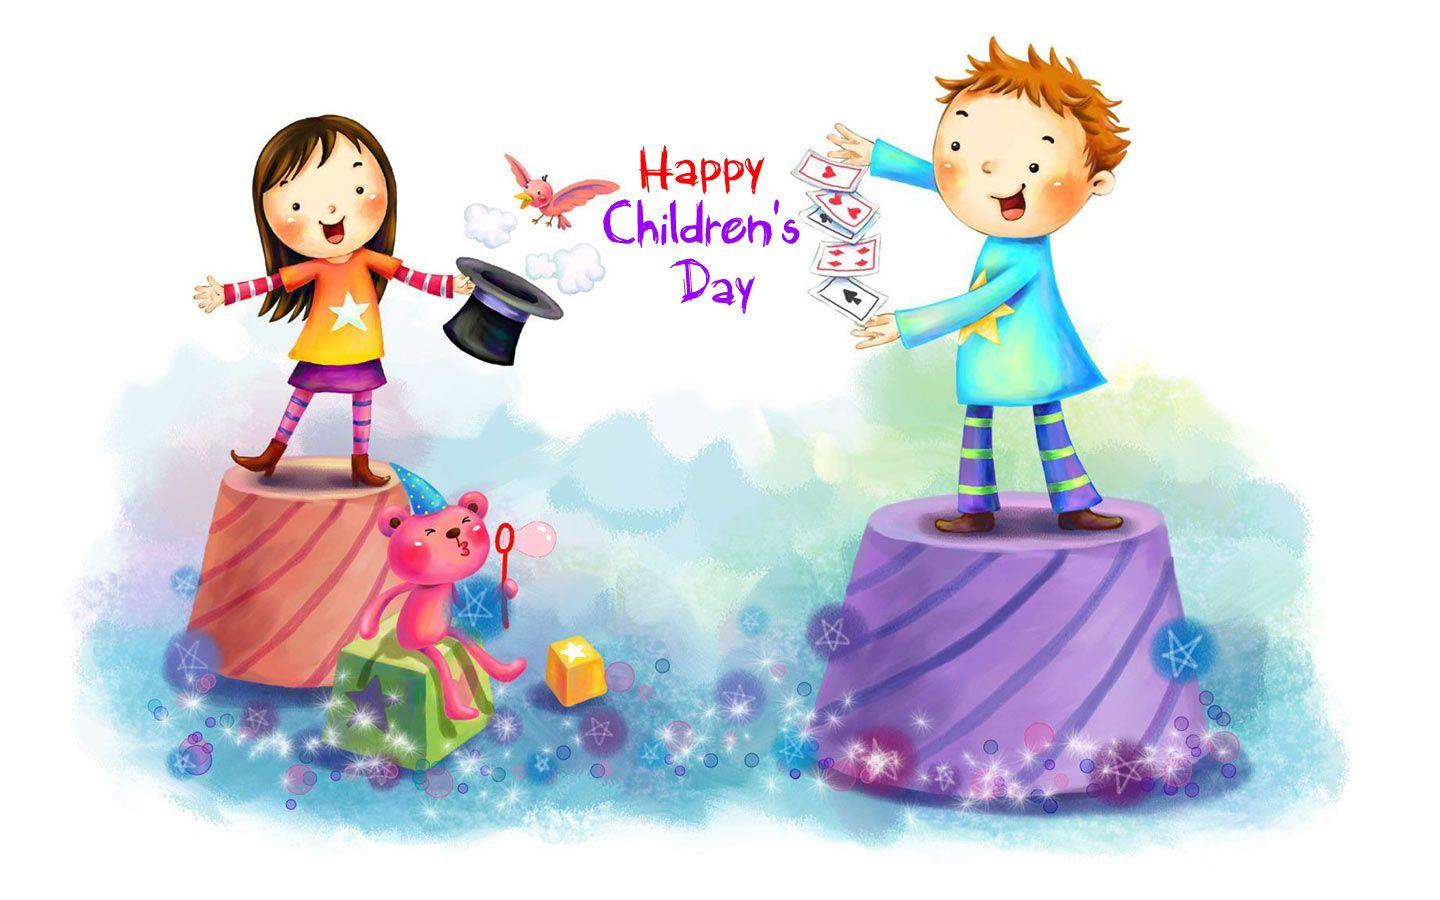 Happy Childrens Day Image, HD Wallpaper, and Photo Free Download